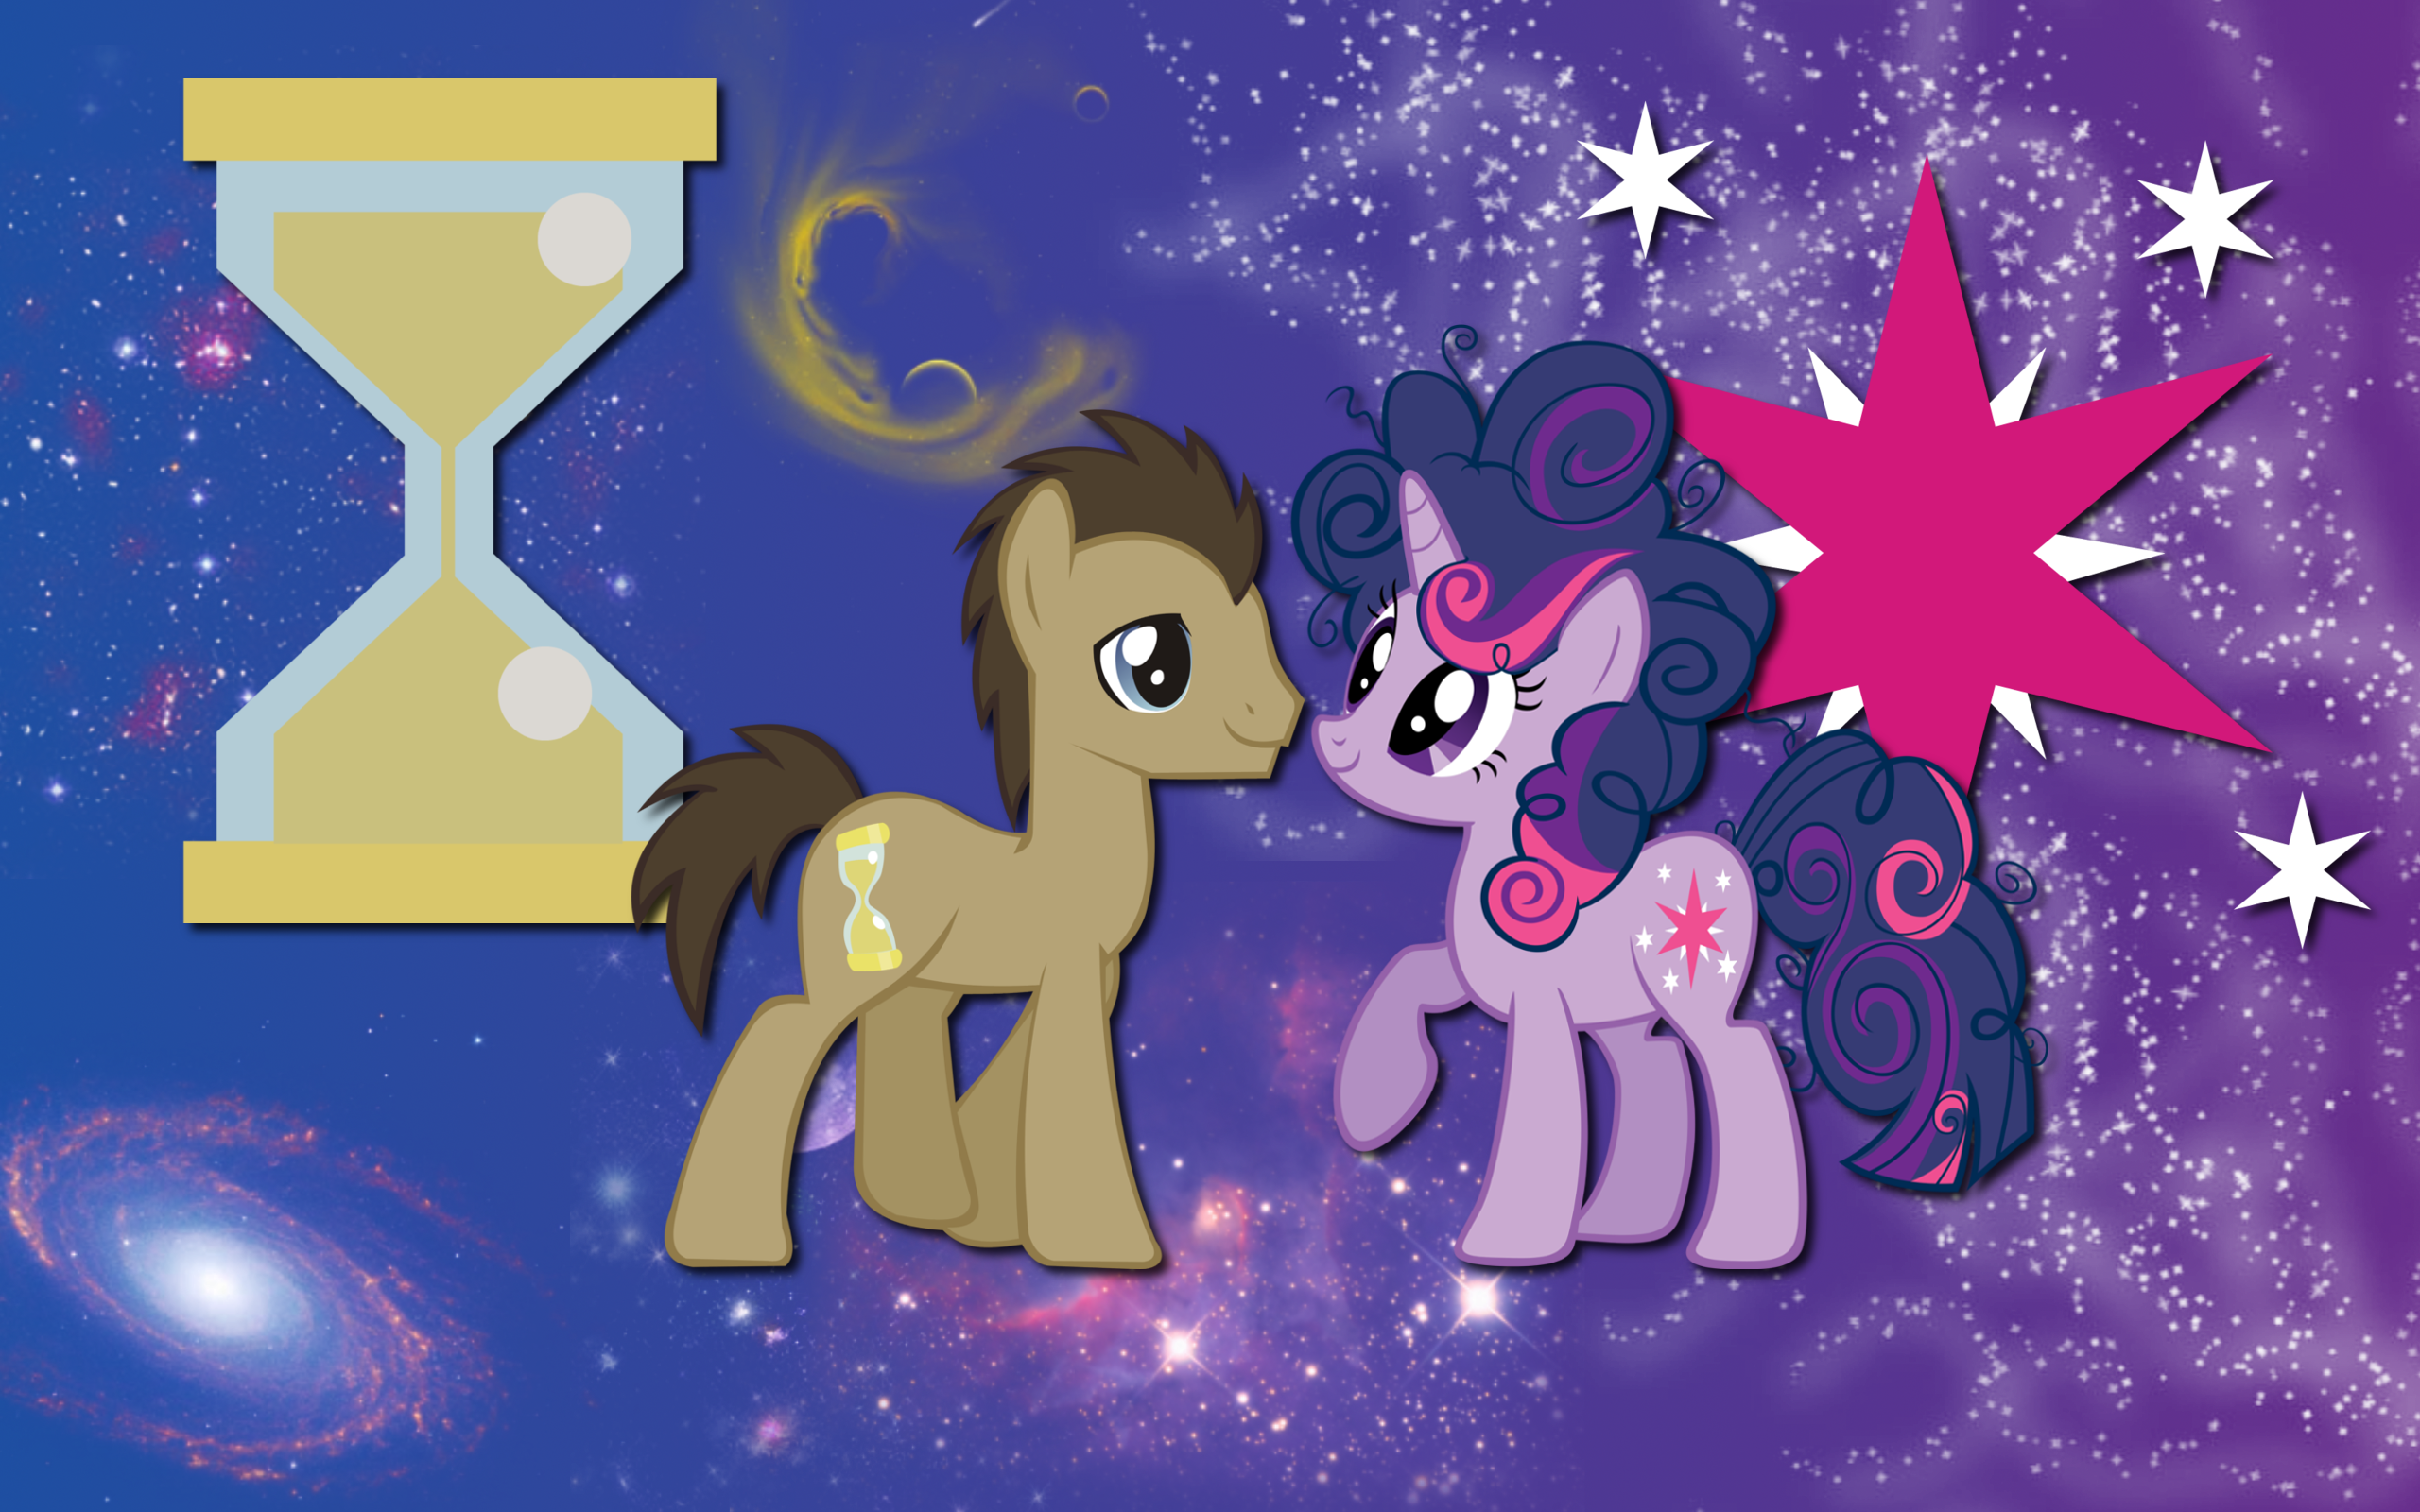 Twi Whooves wallpaper by AliceHumanSacrifice0, Kna, MoongazePonies and ooklah